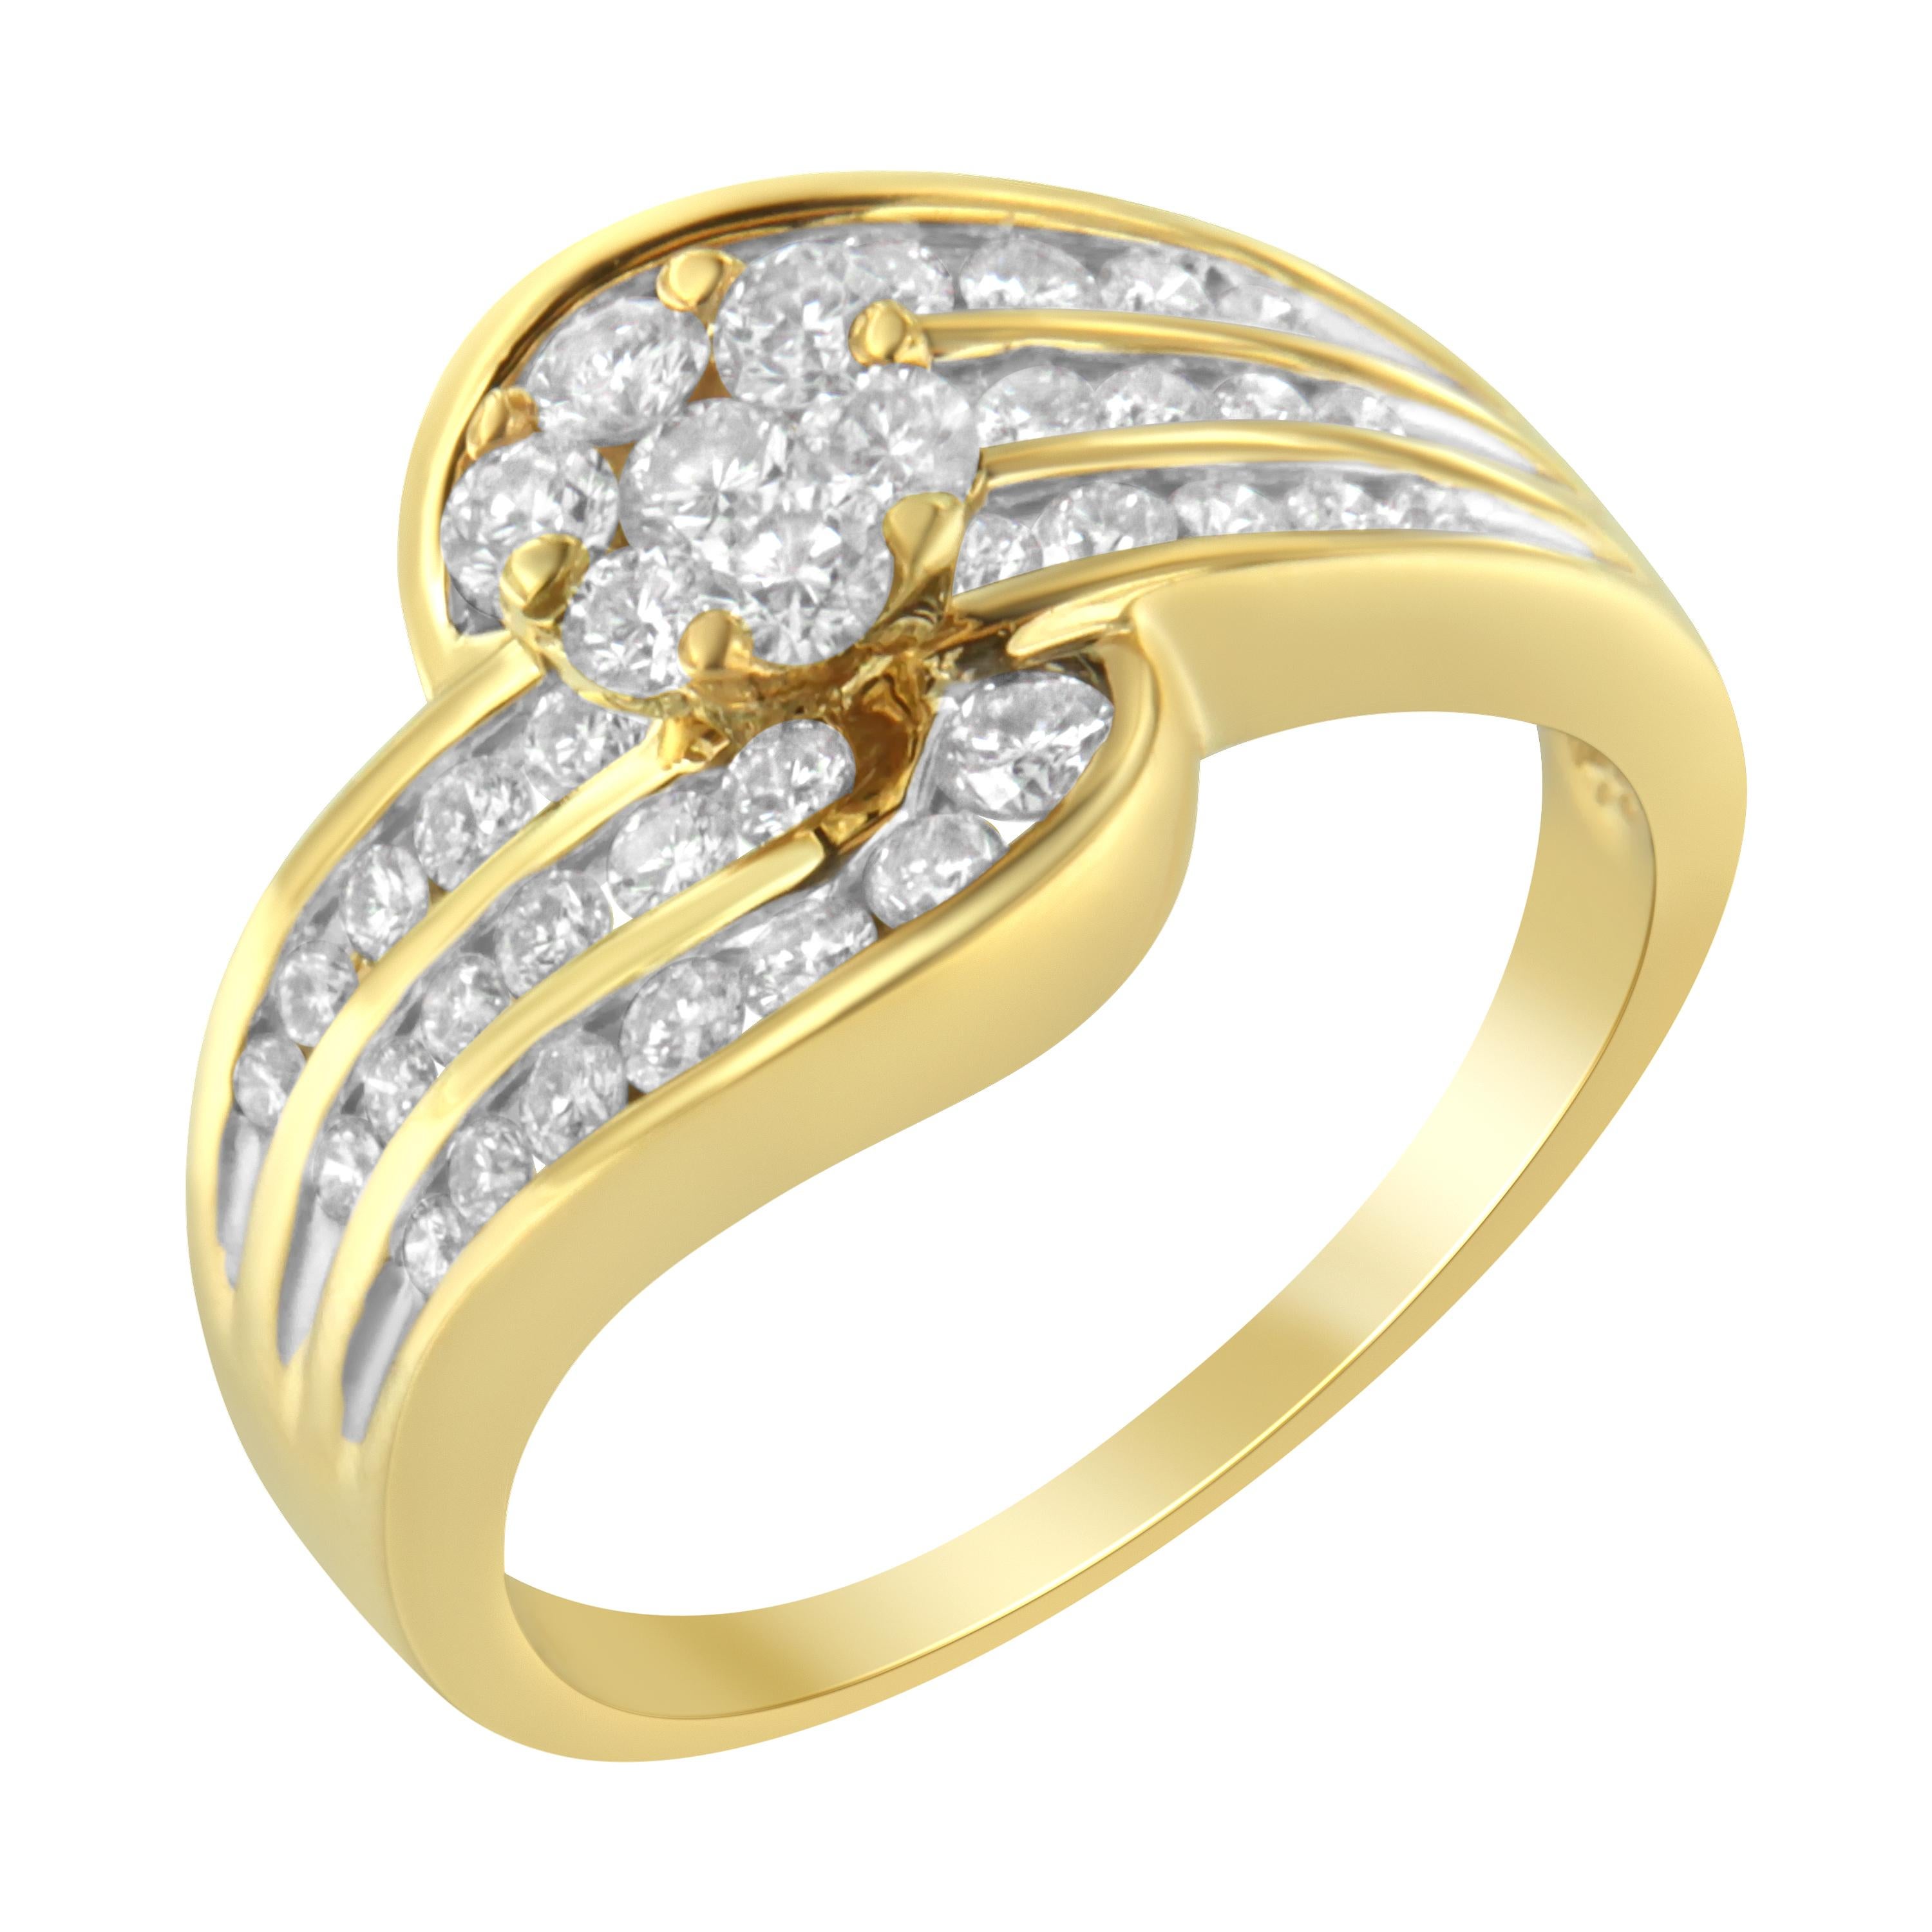 A cocktail bypass ring that features a unique S-form shaped design with a central floral cluster of diamonds surrounded by three rows of channel set round diamonds. The band is crafted in elegant 14 karat yellow gold.

Product Features: 

Diamond